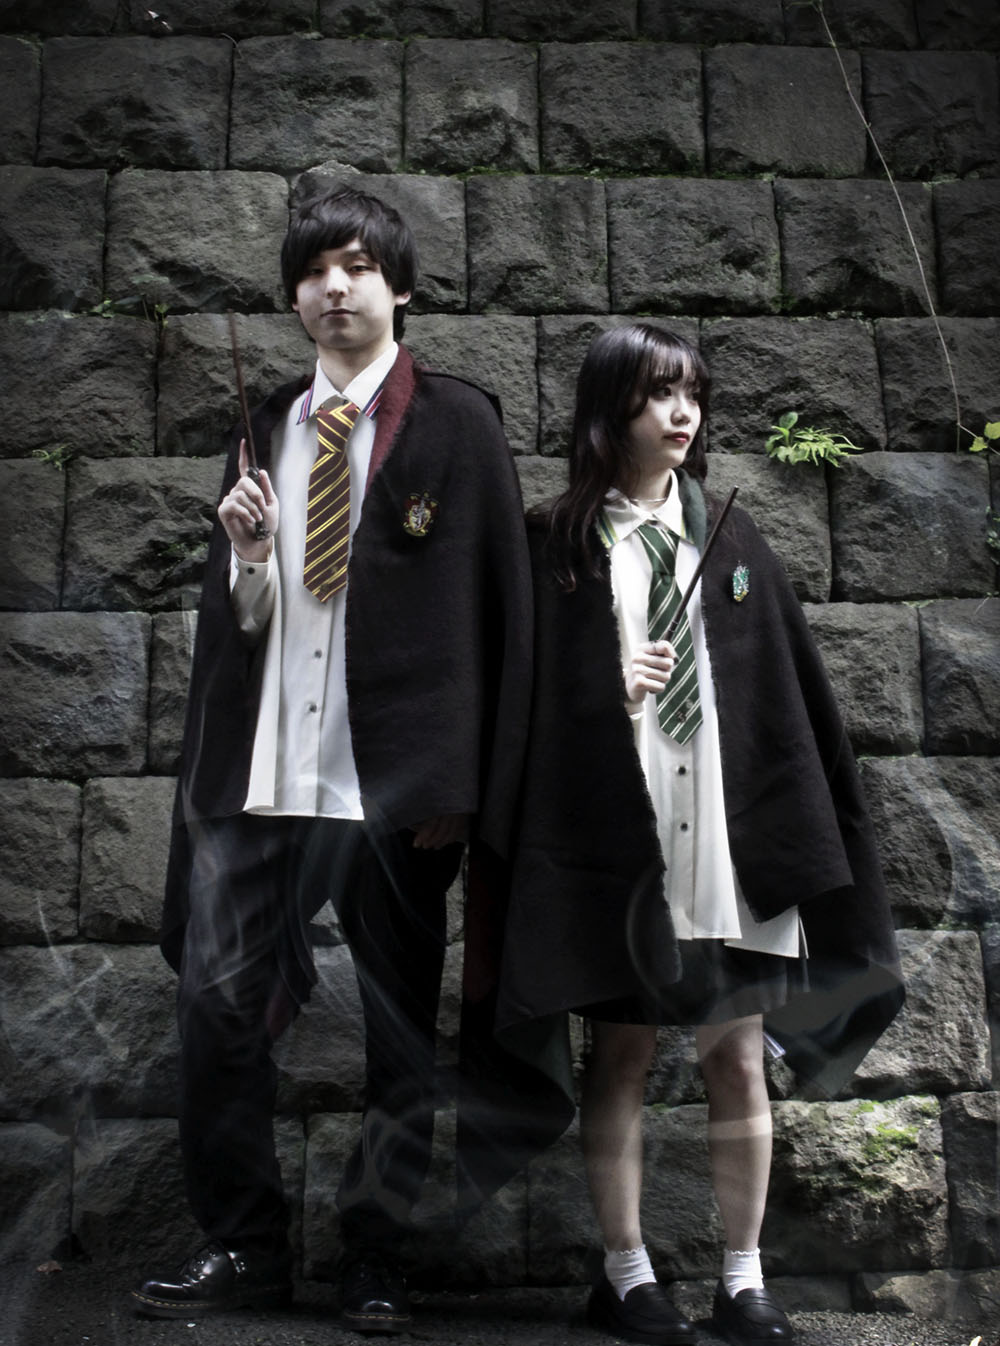 Robe-style stoles (2 types) are now available in the Harry Potter Mahood Koro online shop!